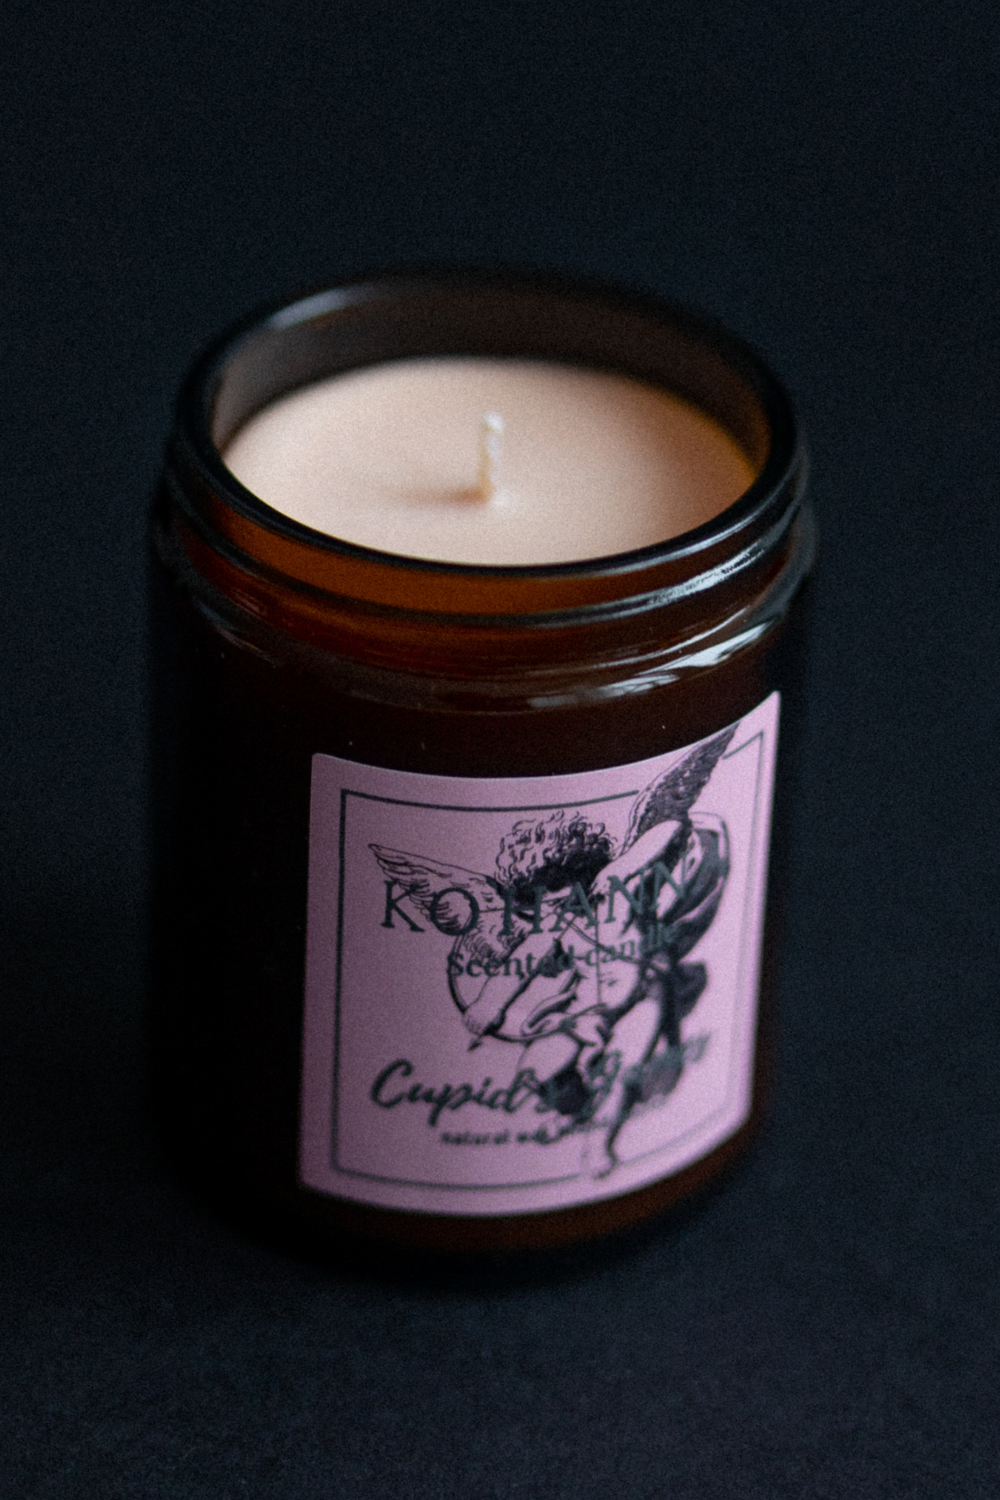 Brown glass, handmade scented candle, Cupid`s Games, 180 ml. (KO&